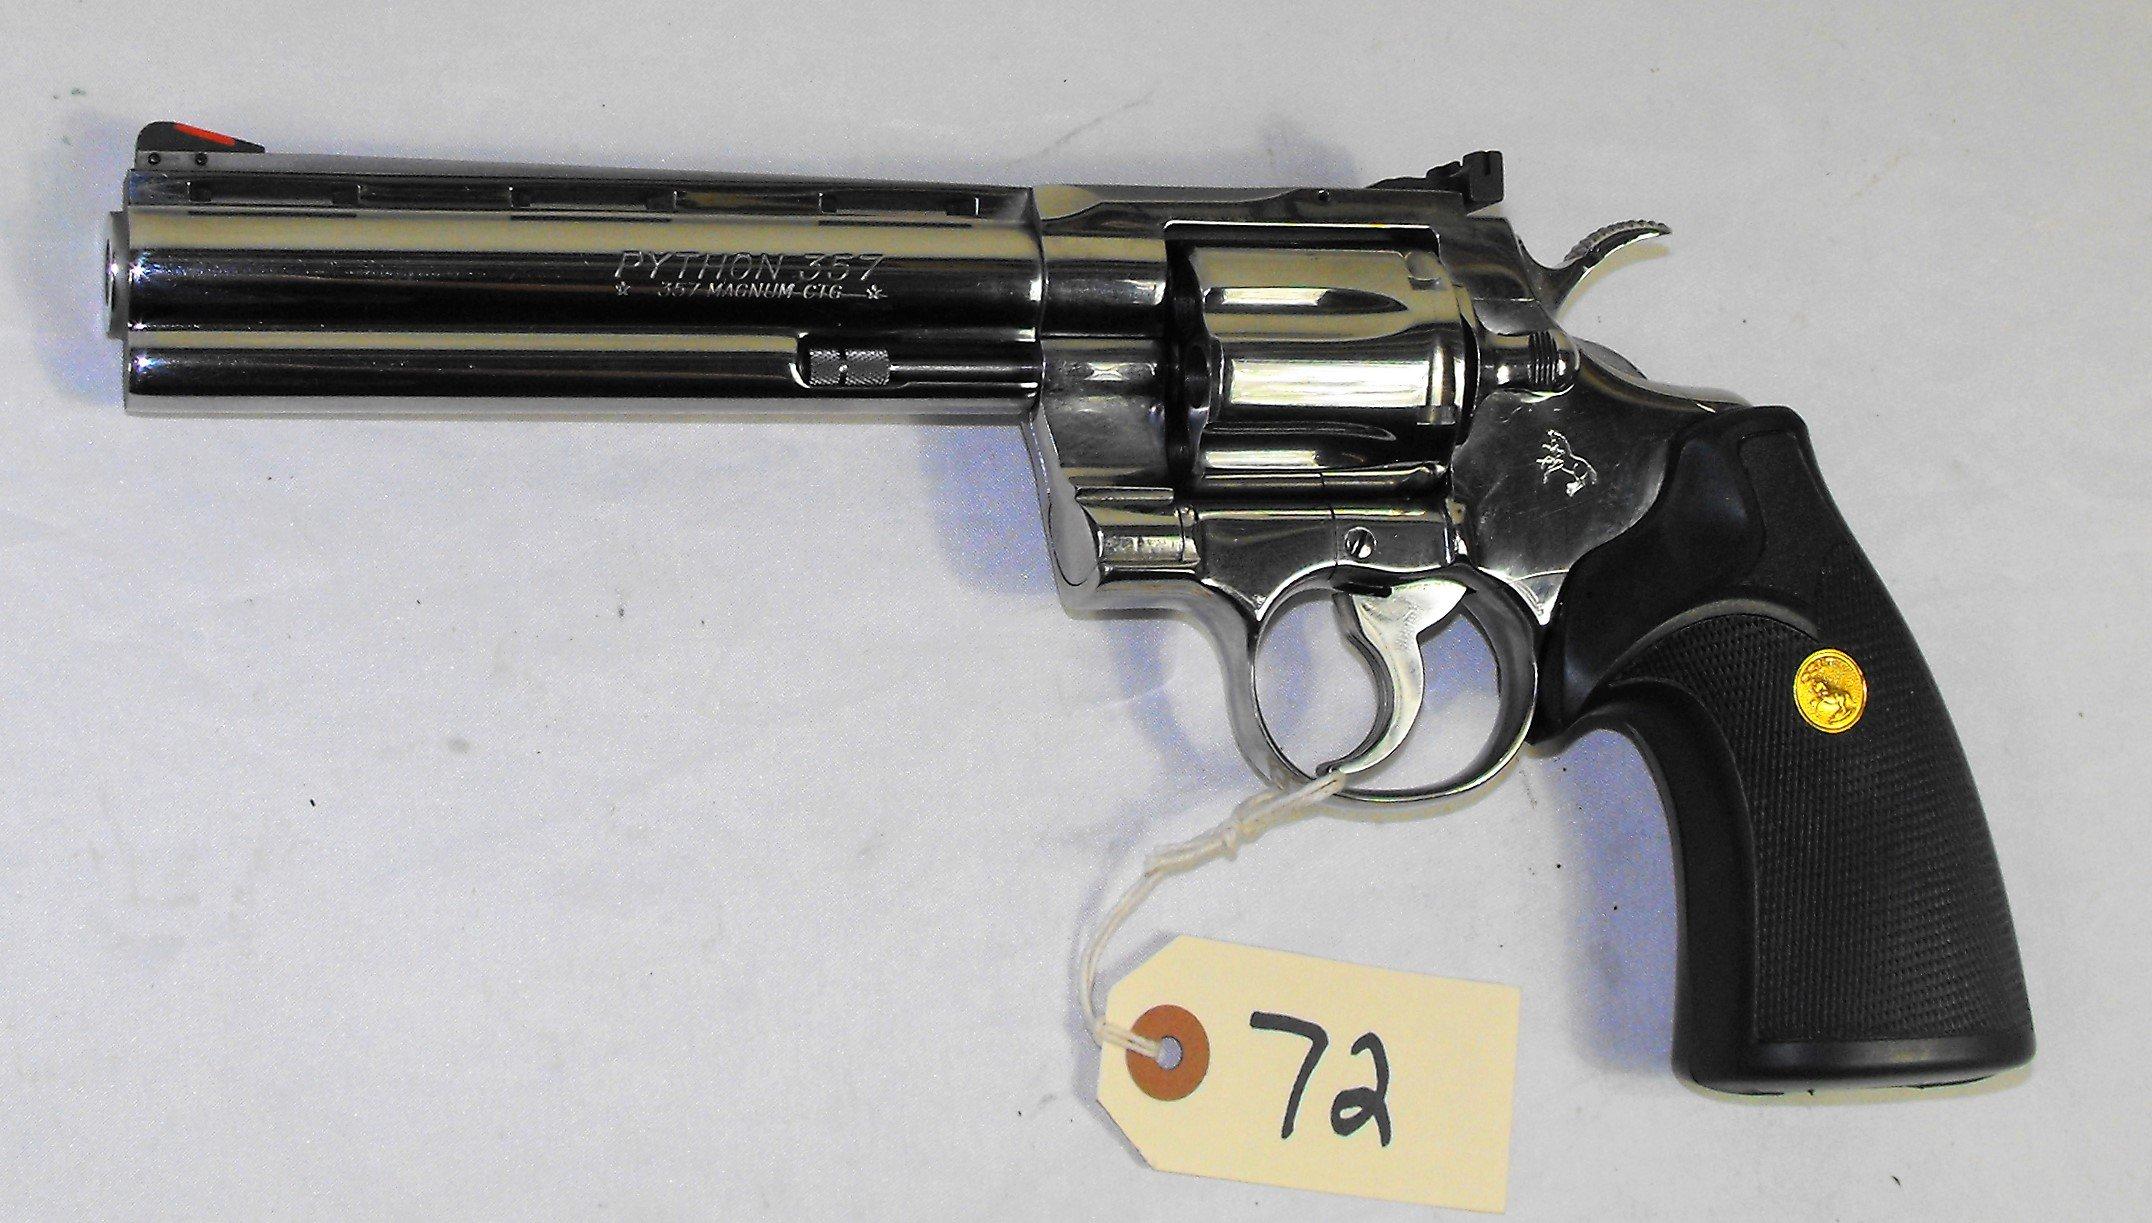 COLT PYTHON 357 MAG 6-SHOT DOUBLE ACTION “BRIGHT STAINLESS” REVOLVER